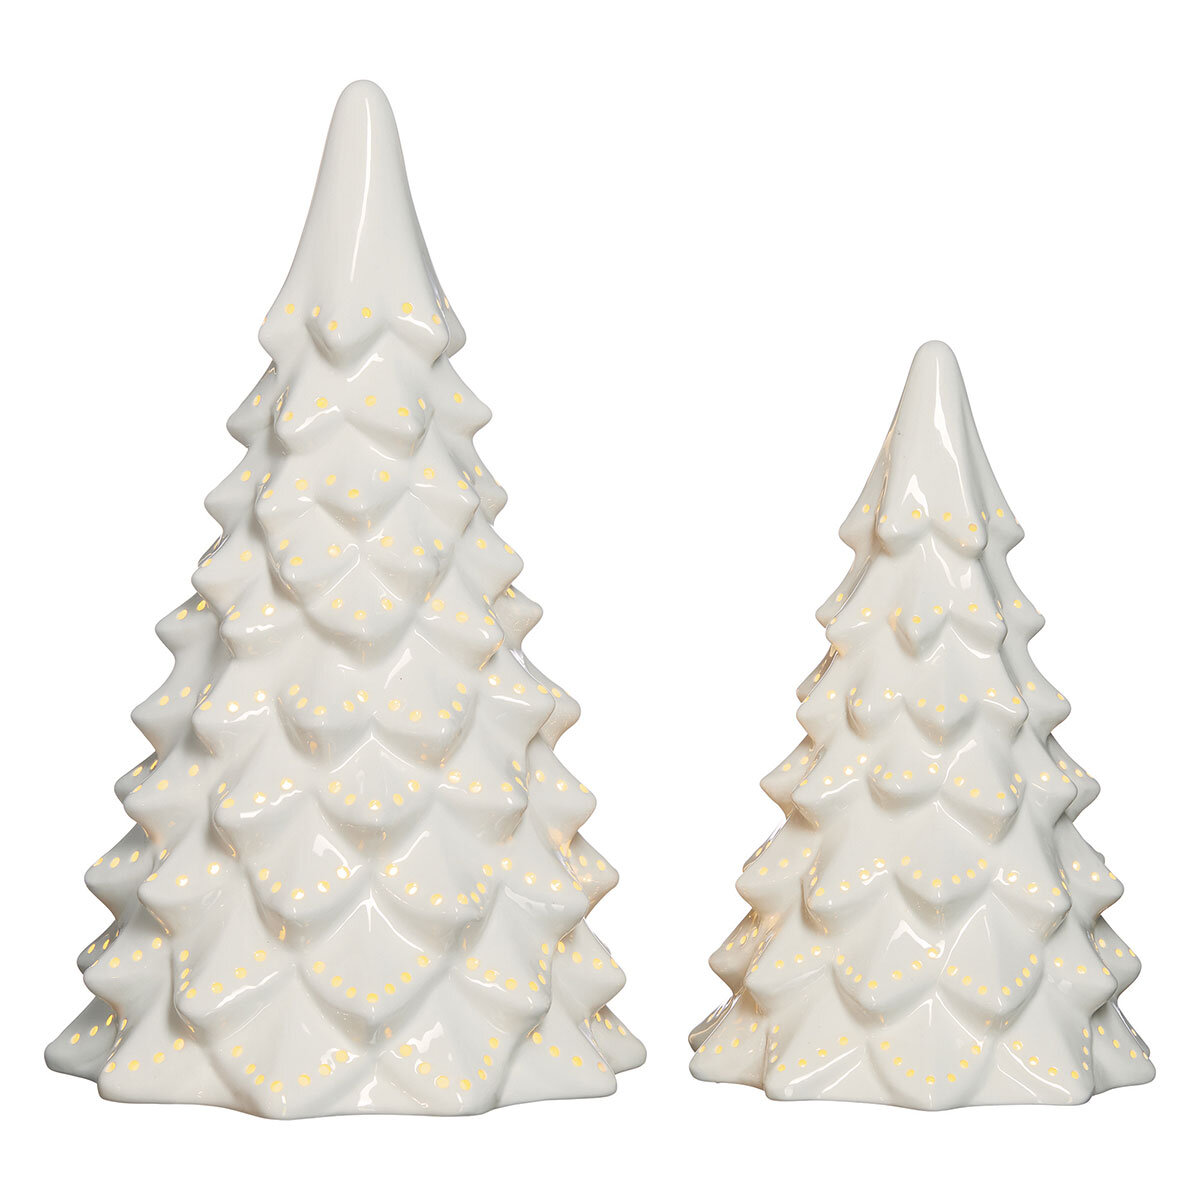 Buy 2 Piece Ceramic Trees Overview Image at Costco.co.uk